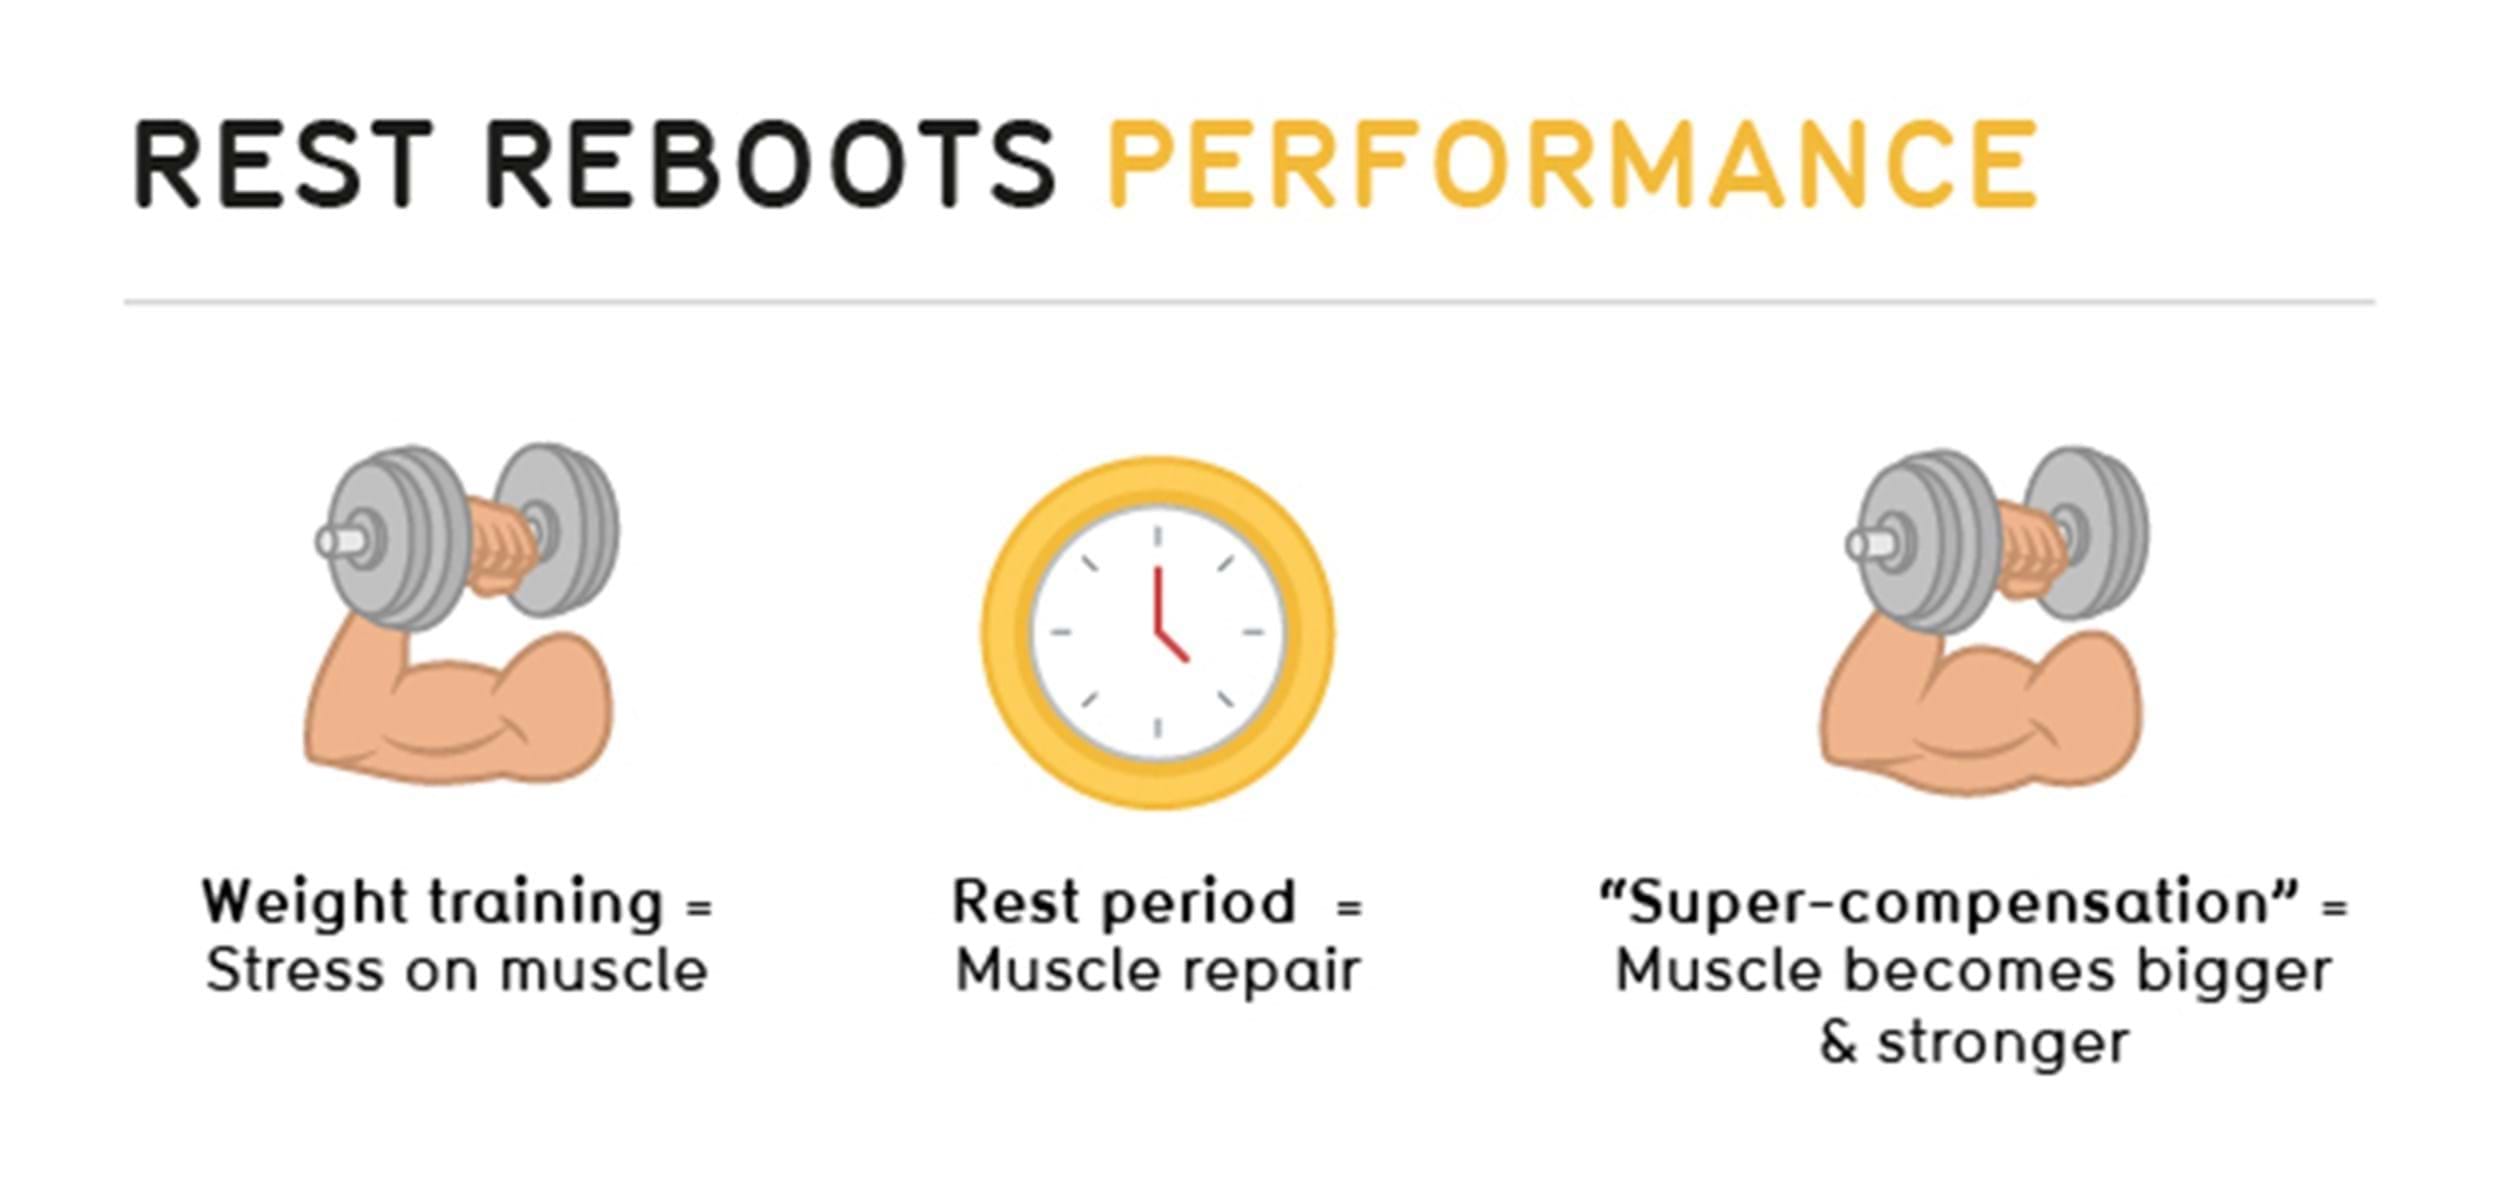 Rest days help to reboot performance